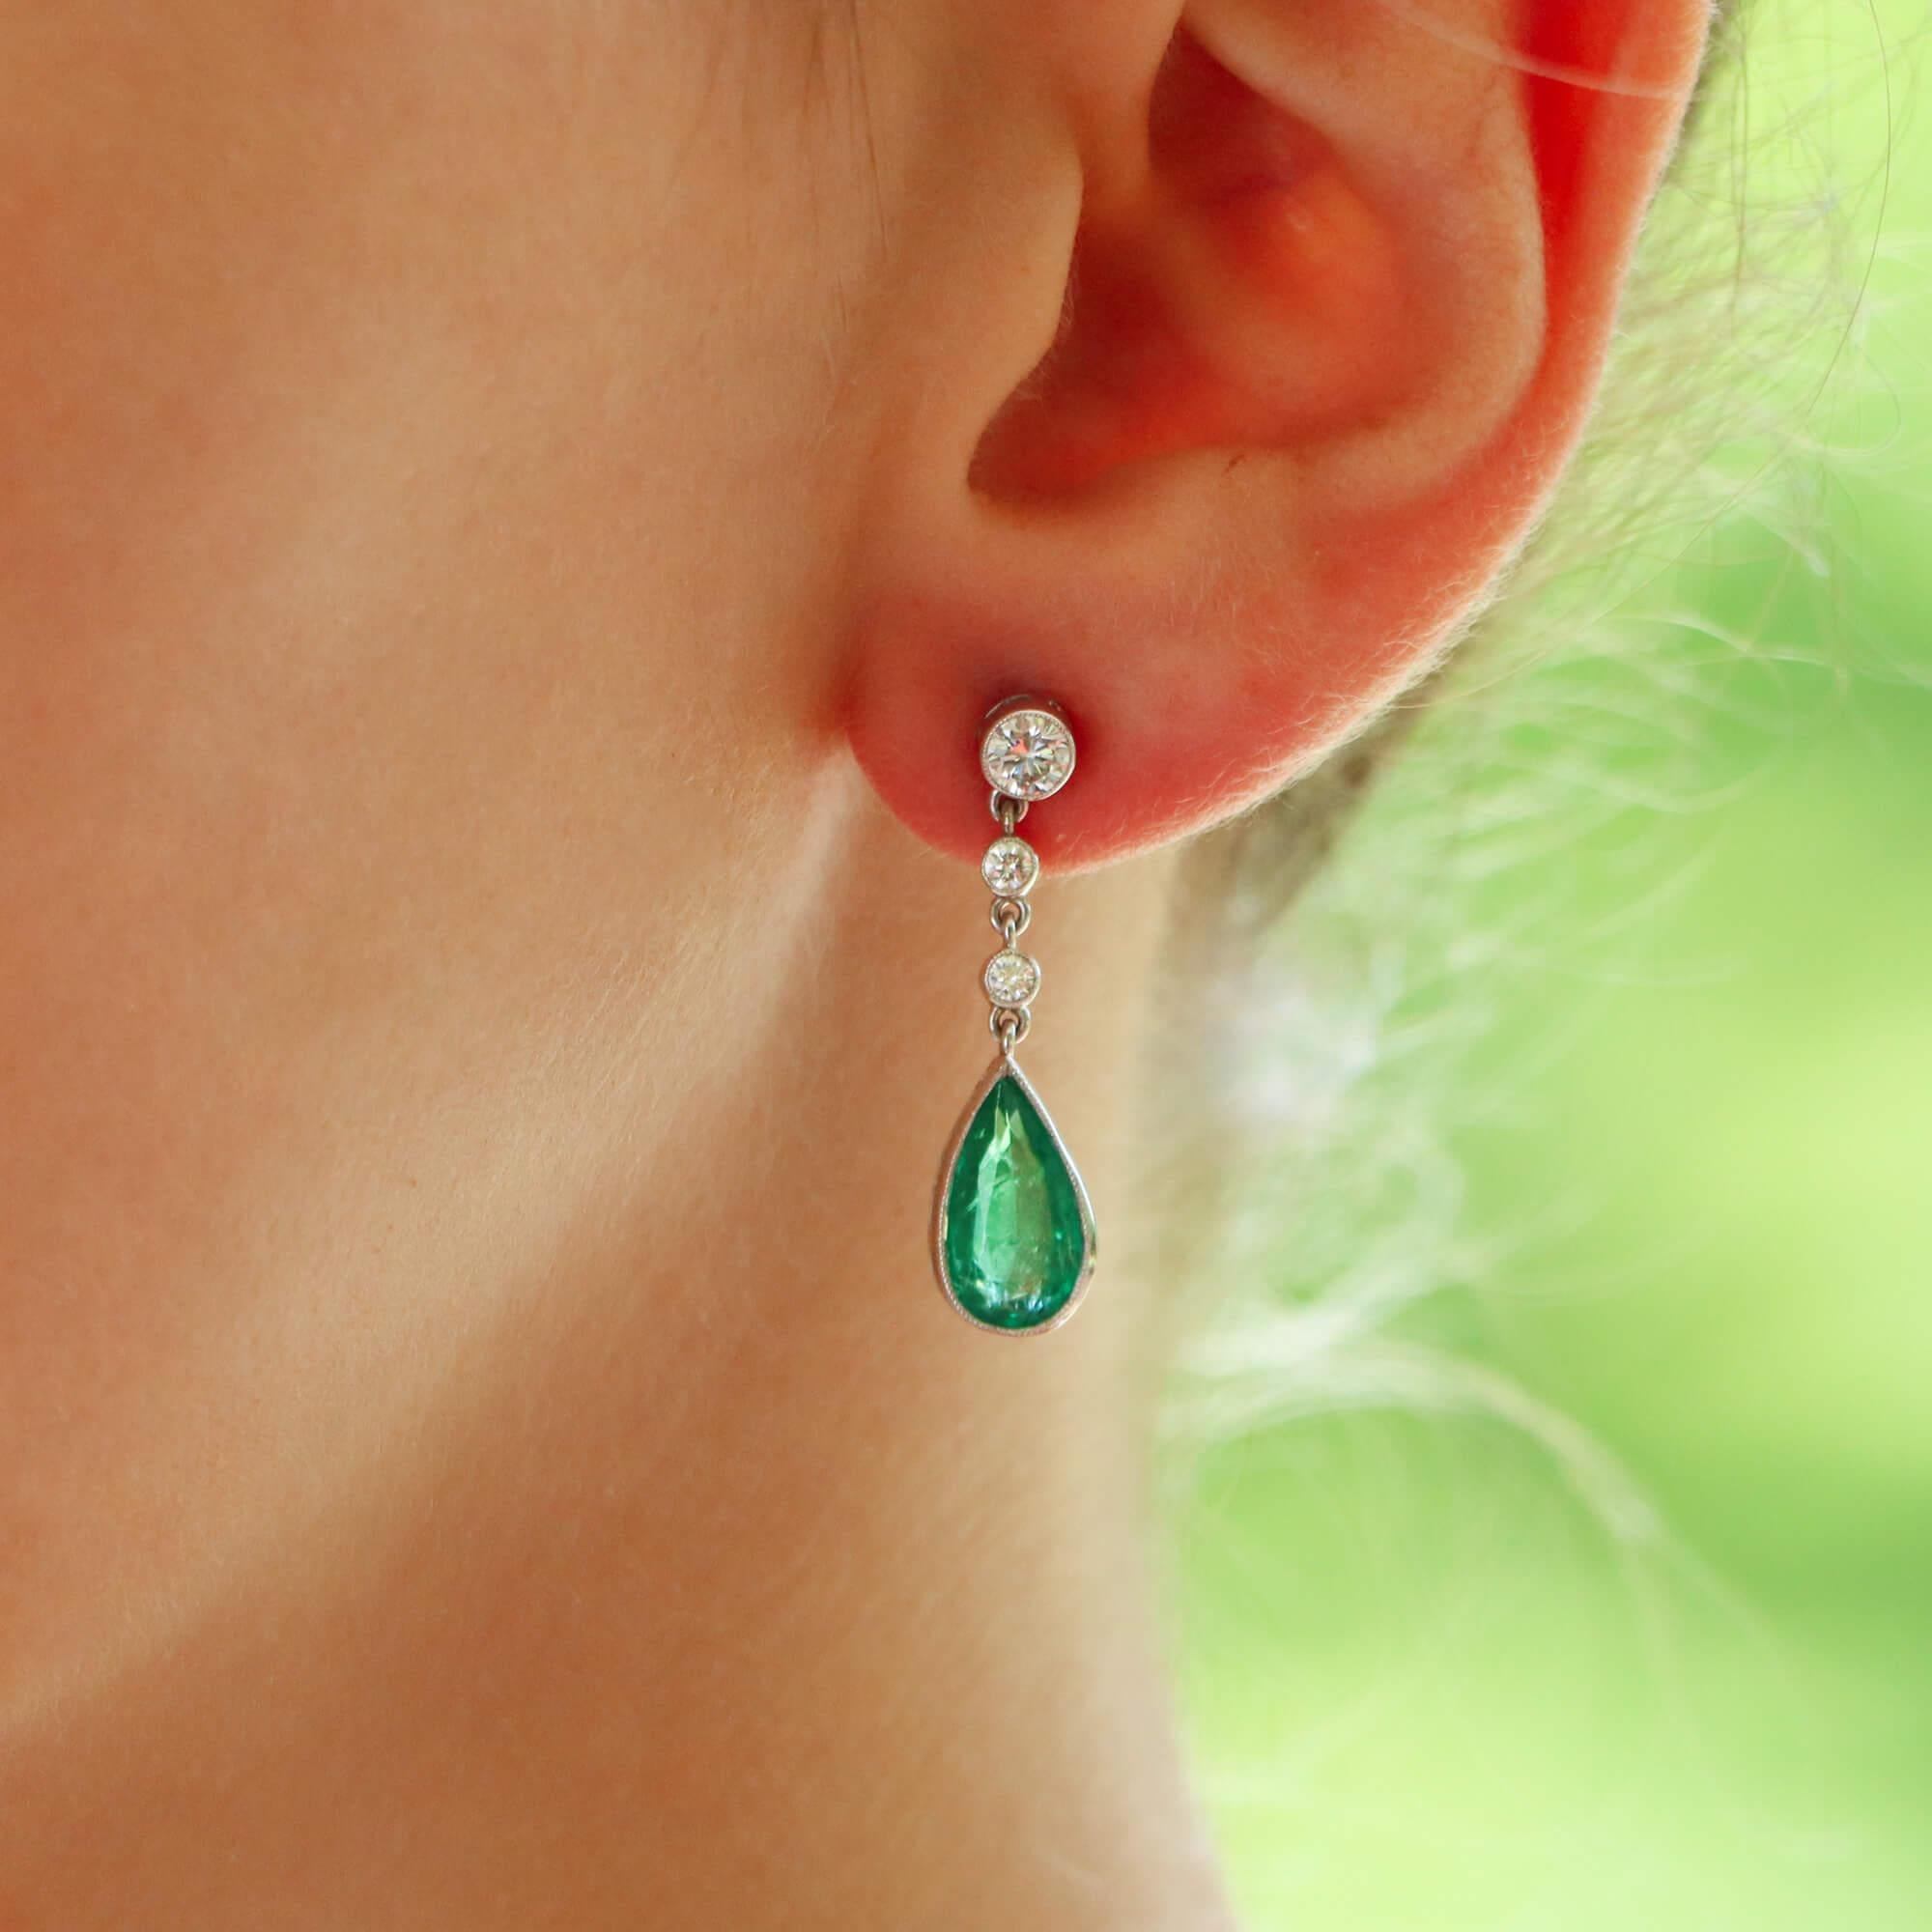 Modern Contemporary Pear Cut Emerald and Diamond Drop Earrings Set in 18k White Gold For Sale